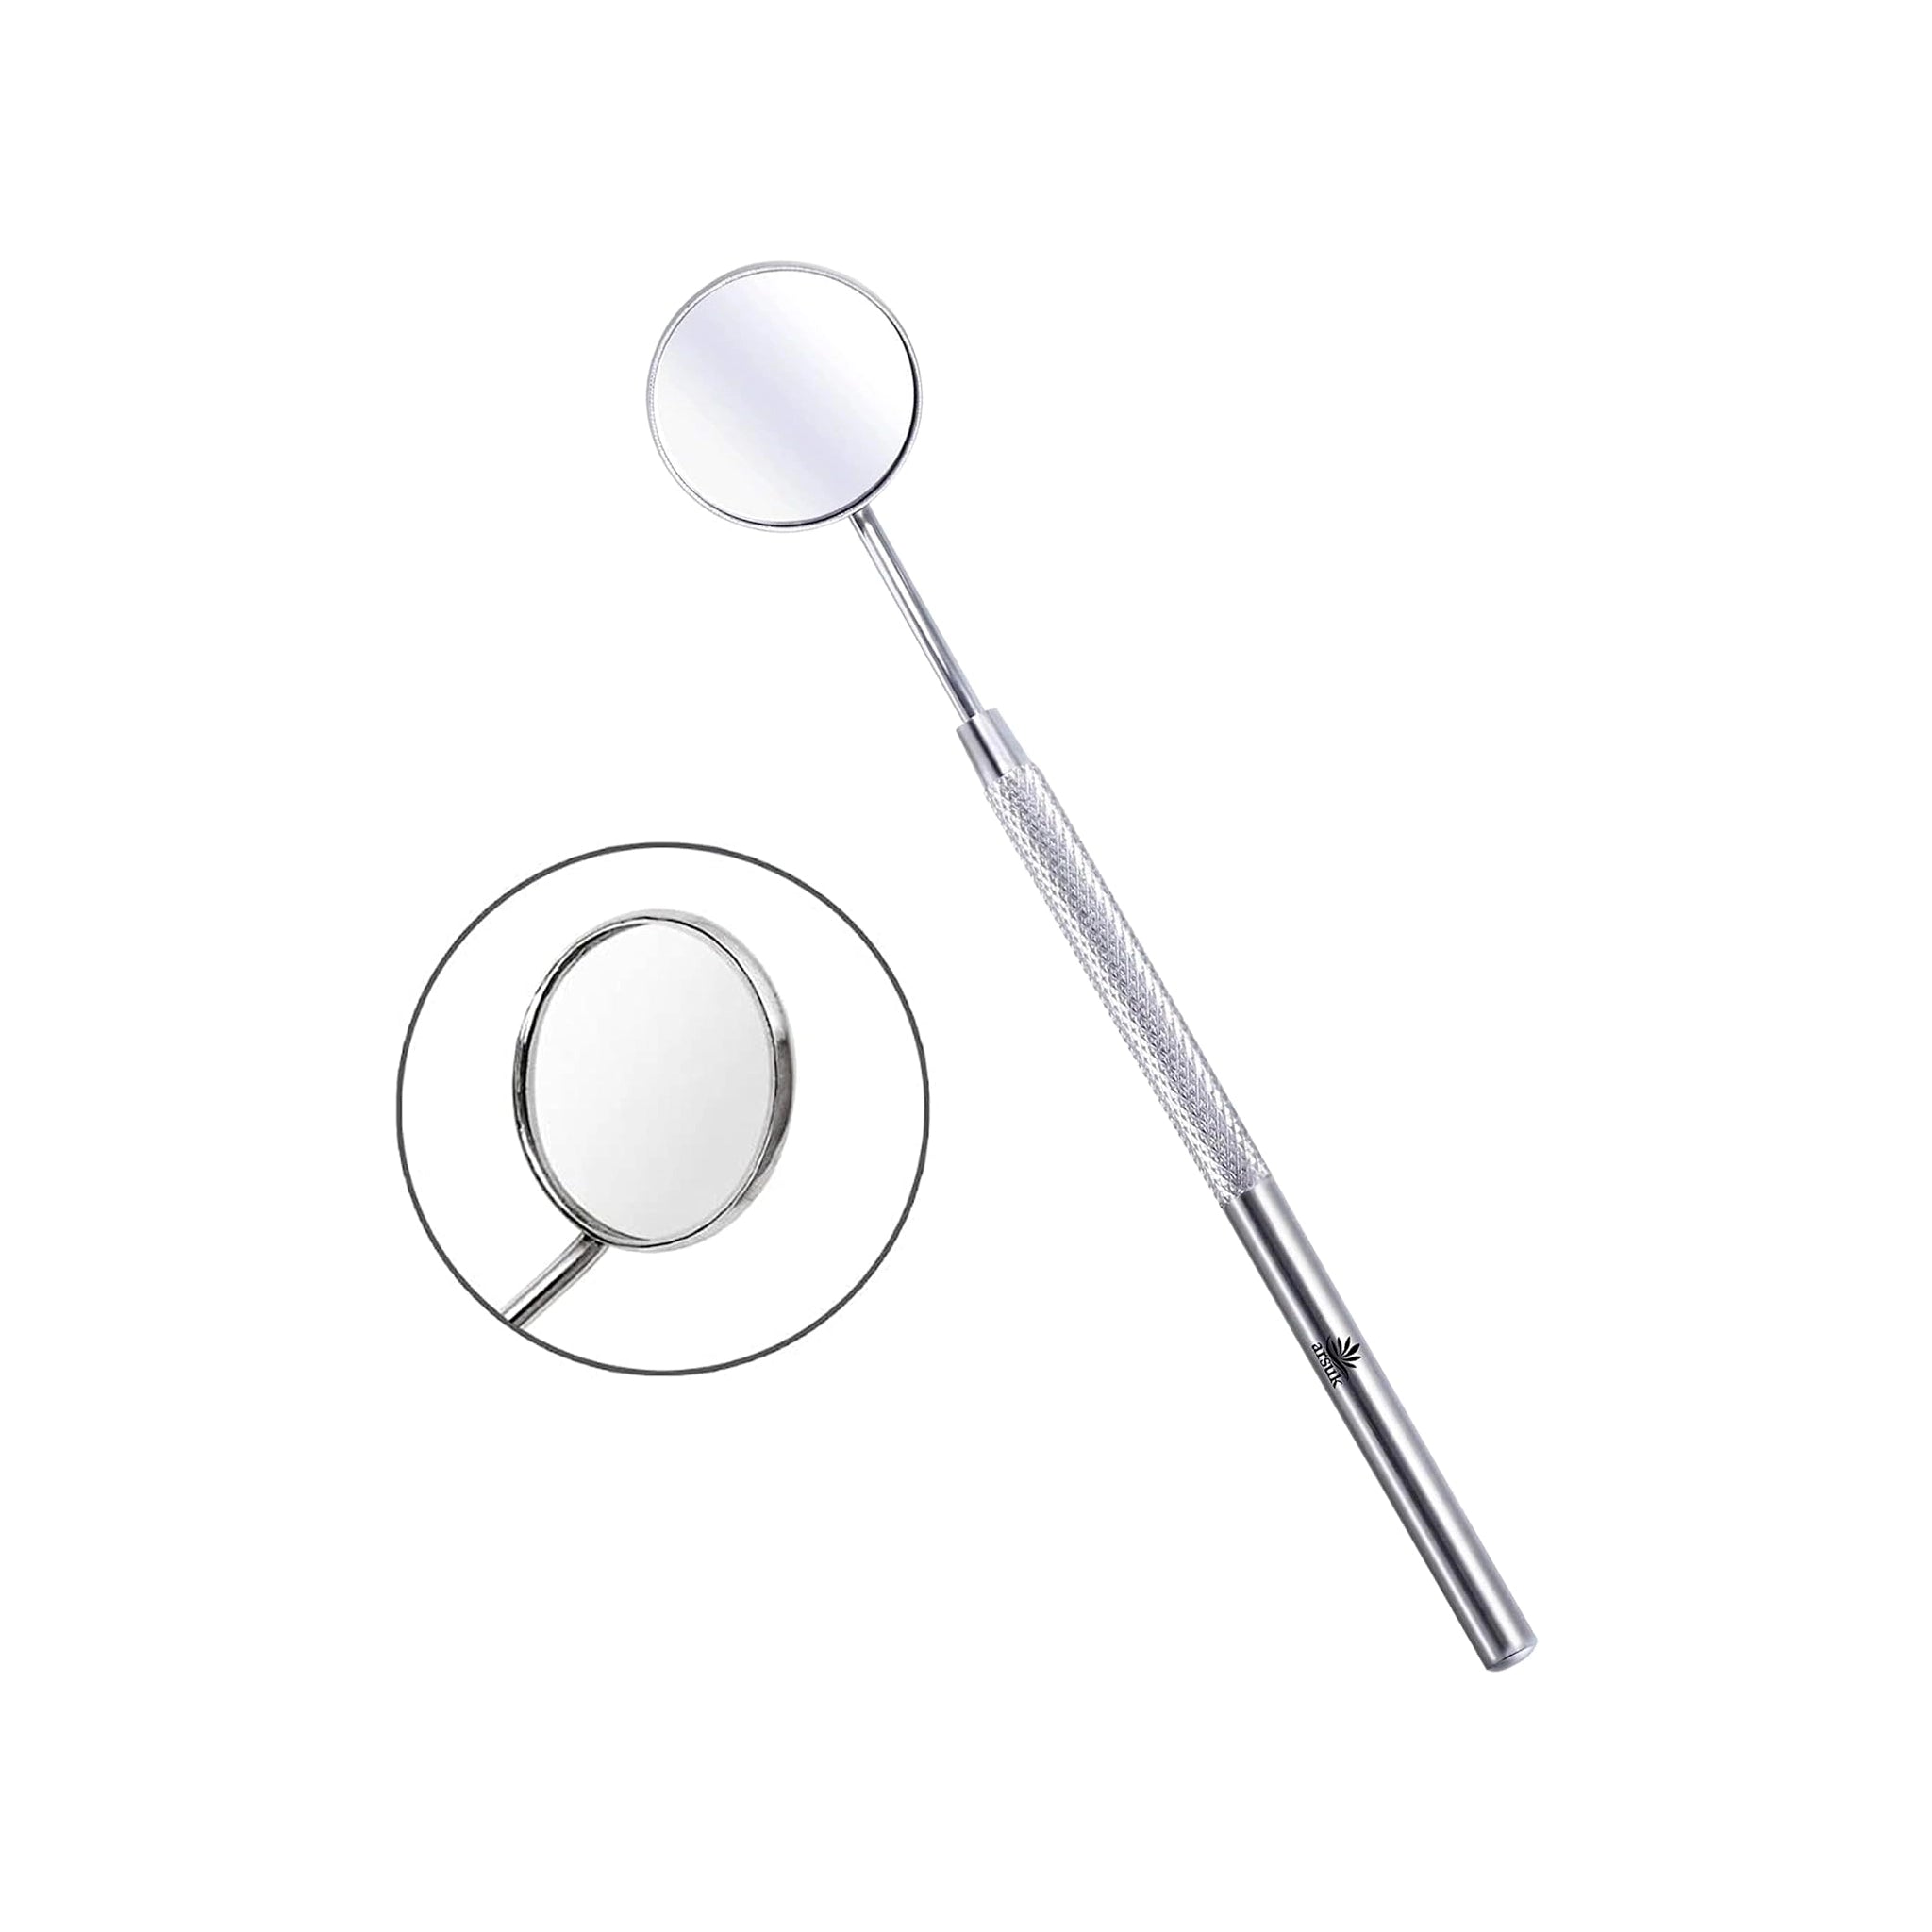 Dental Mouth Mirror - Oral, Teeth, Mouth Dentist Curve Angle Mirror for Teeth Inspection